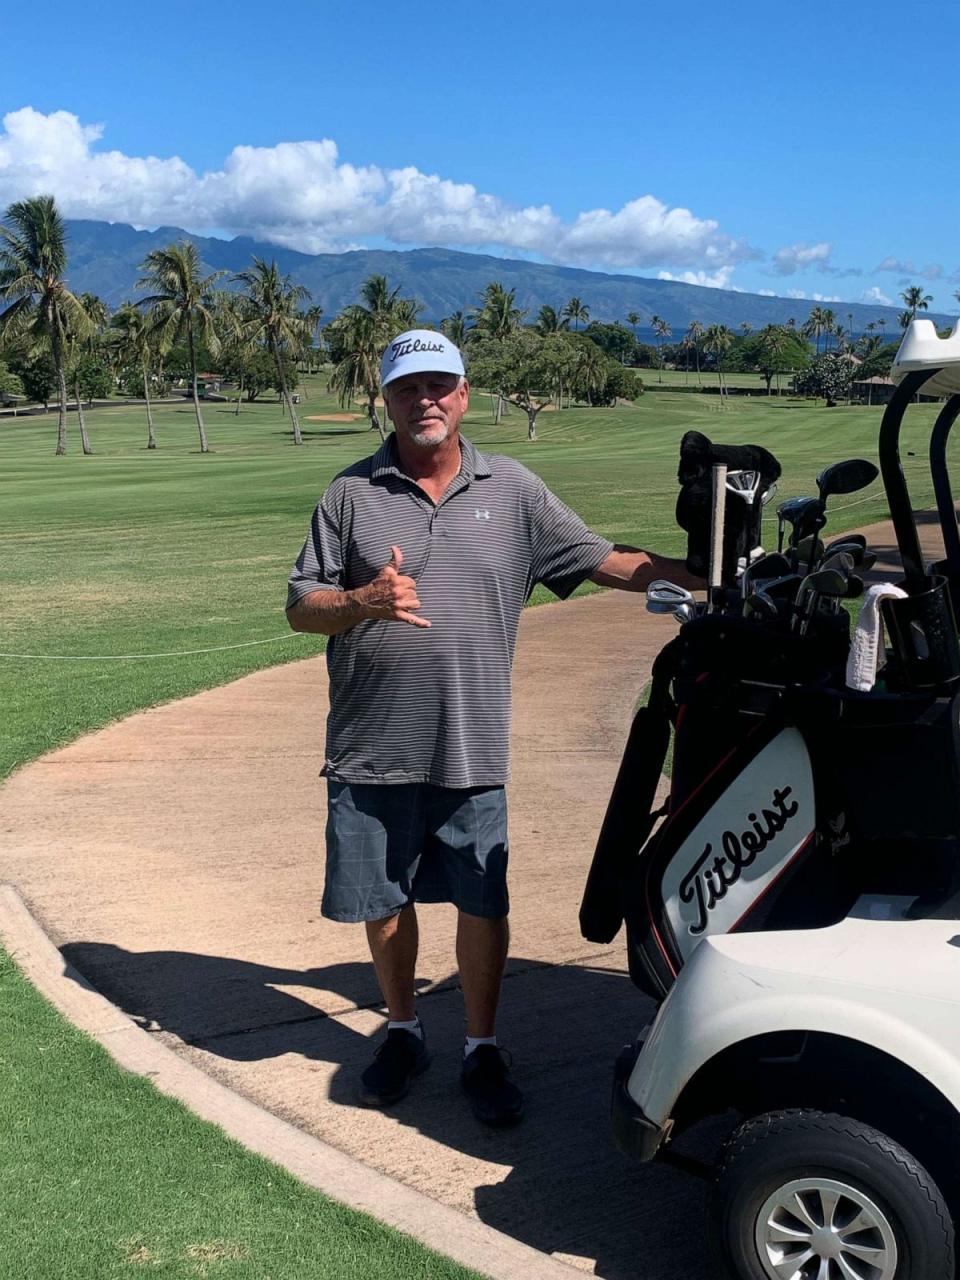 PHOTO: In an undated photo, Joe Schilling, 67, is seen on a golf course in Lahaina, Hawaii. (Courtesy of Bill Schilling)